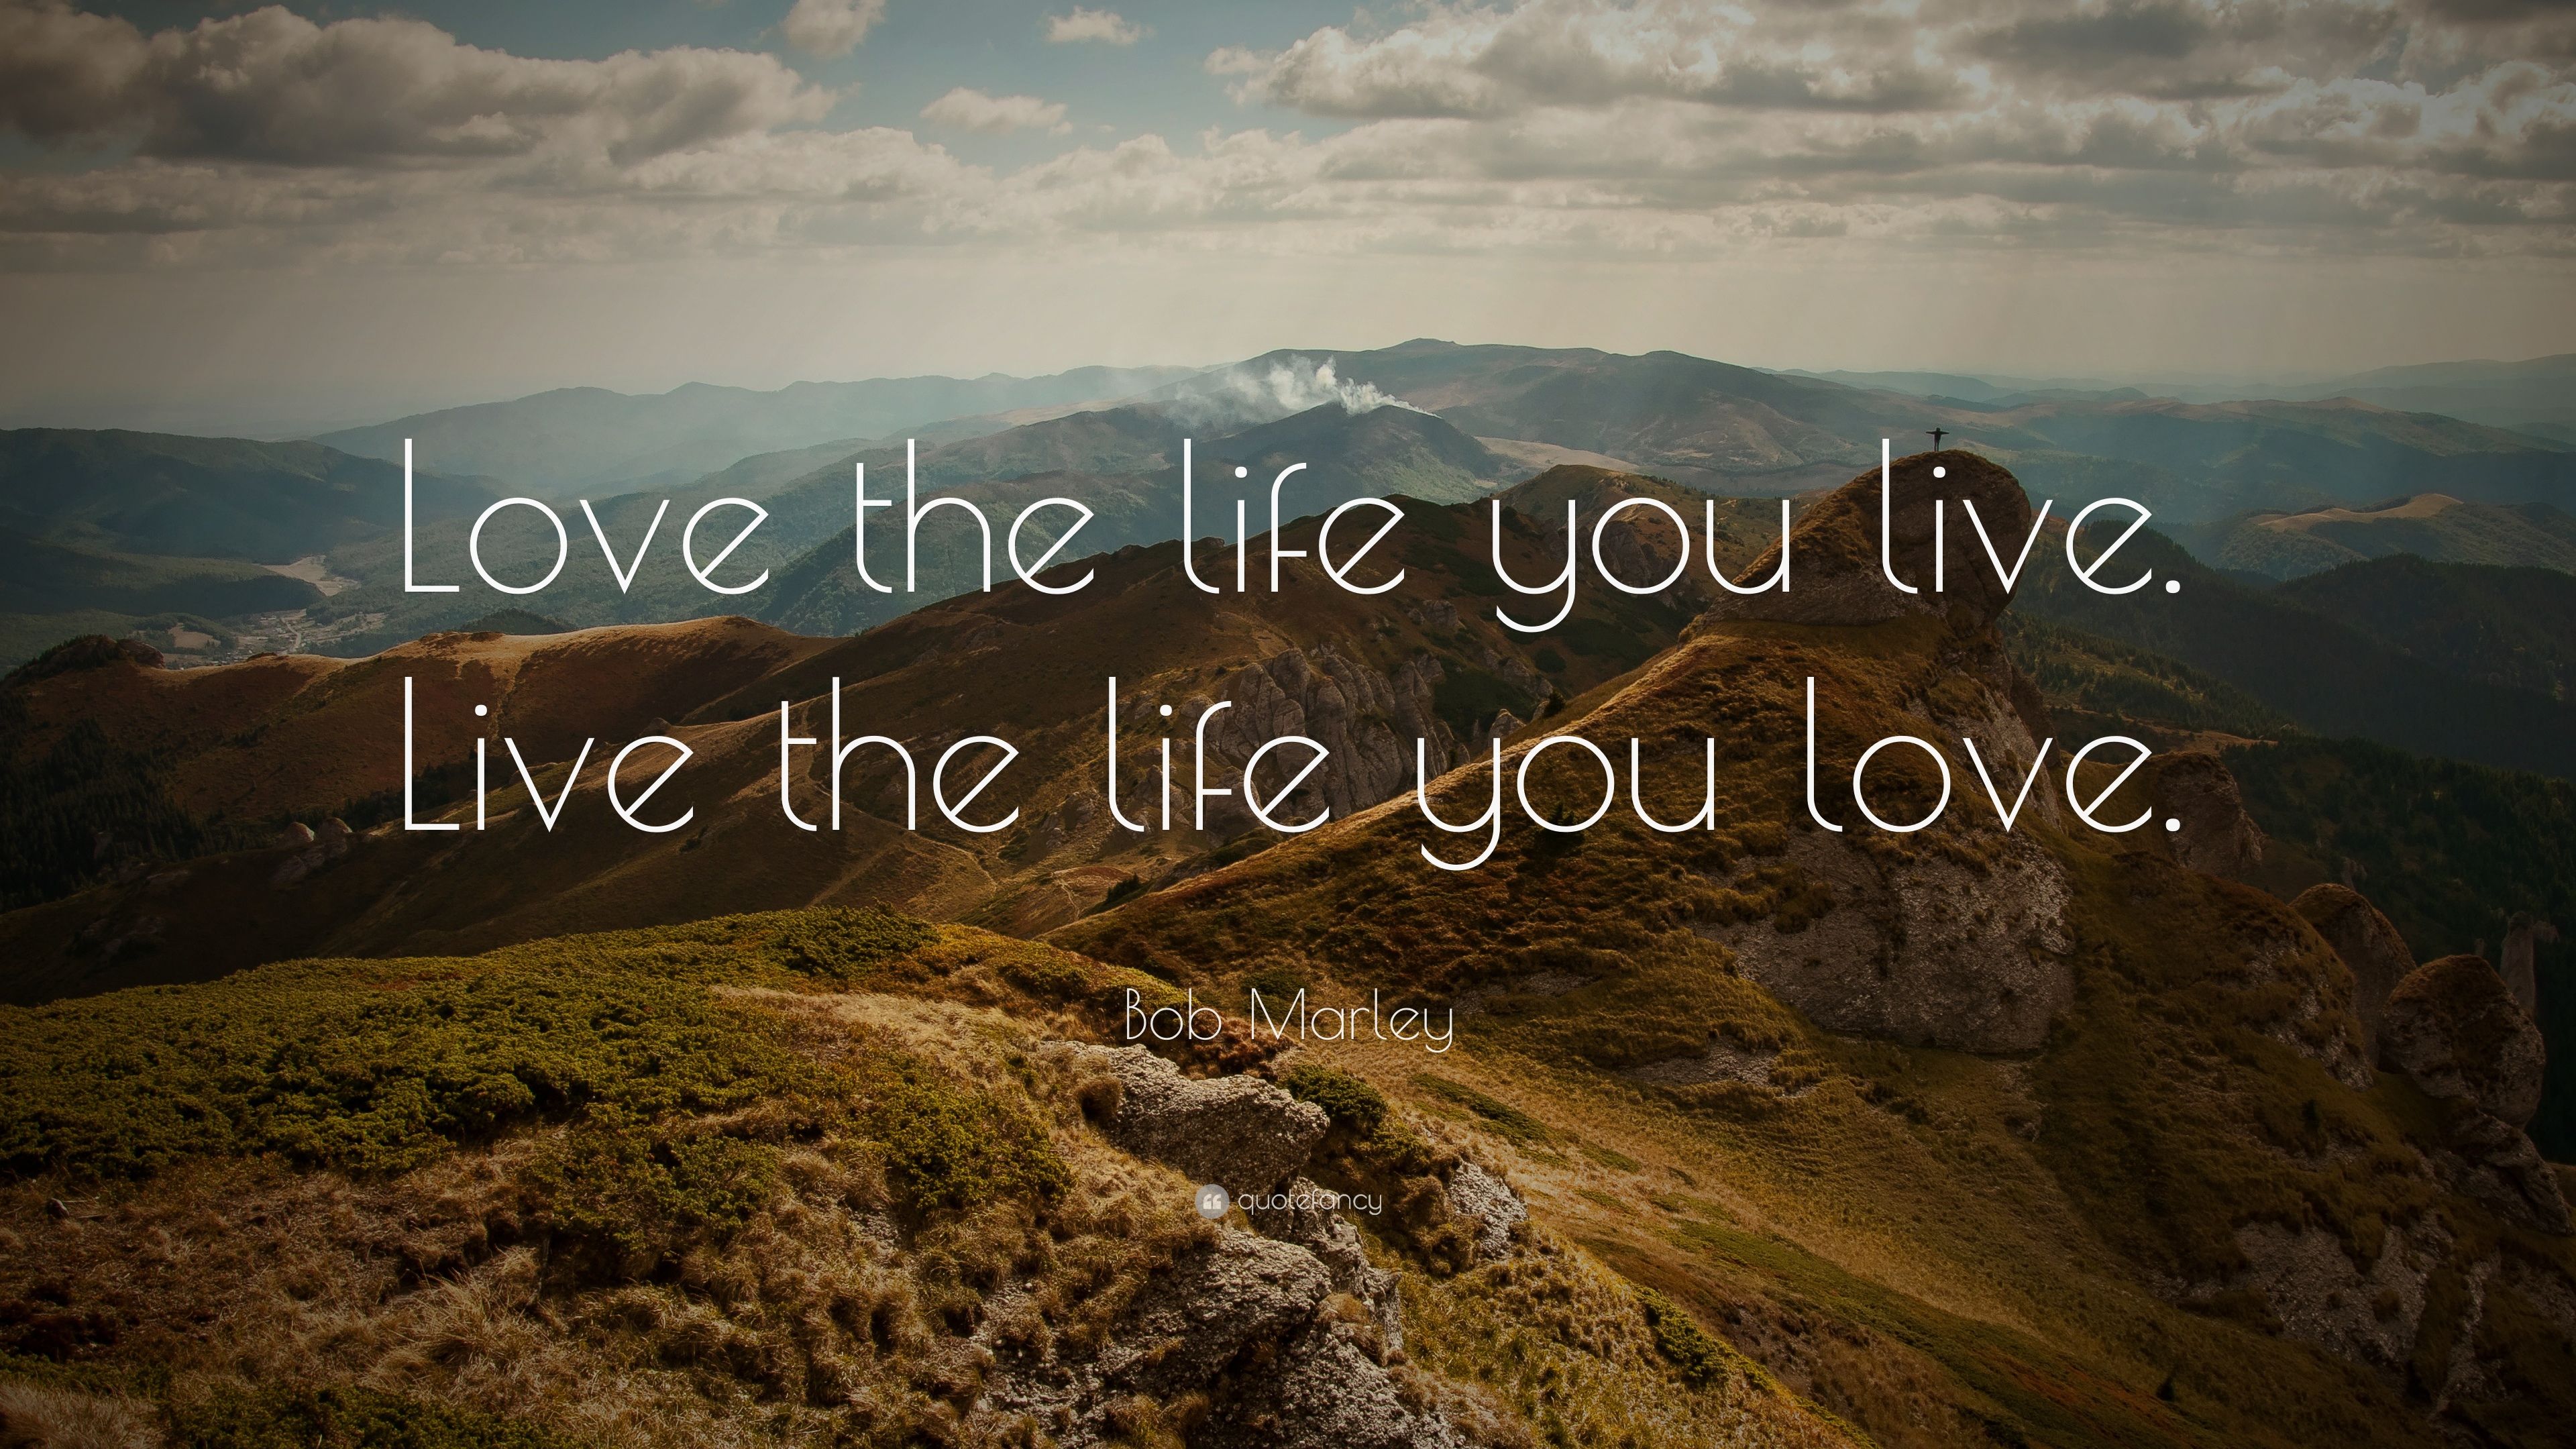 100 Inspirational Quotes That Will Make You Love Life Again.